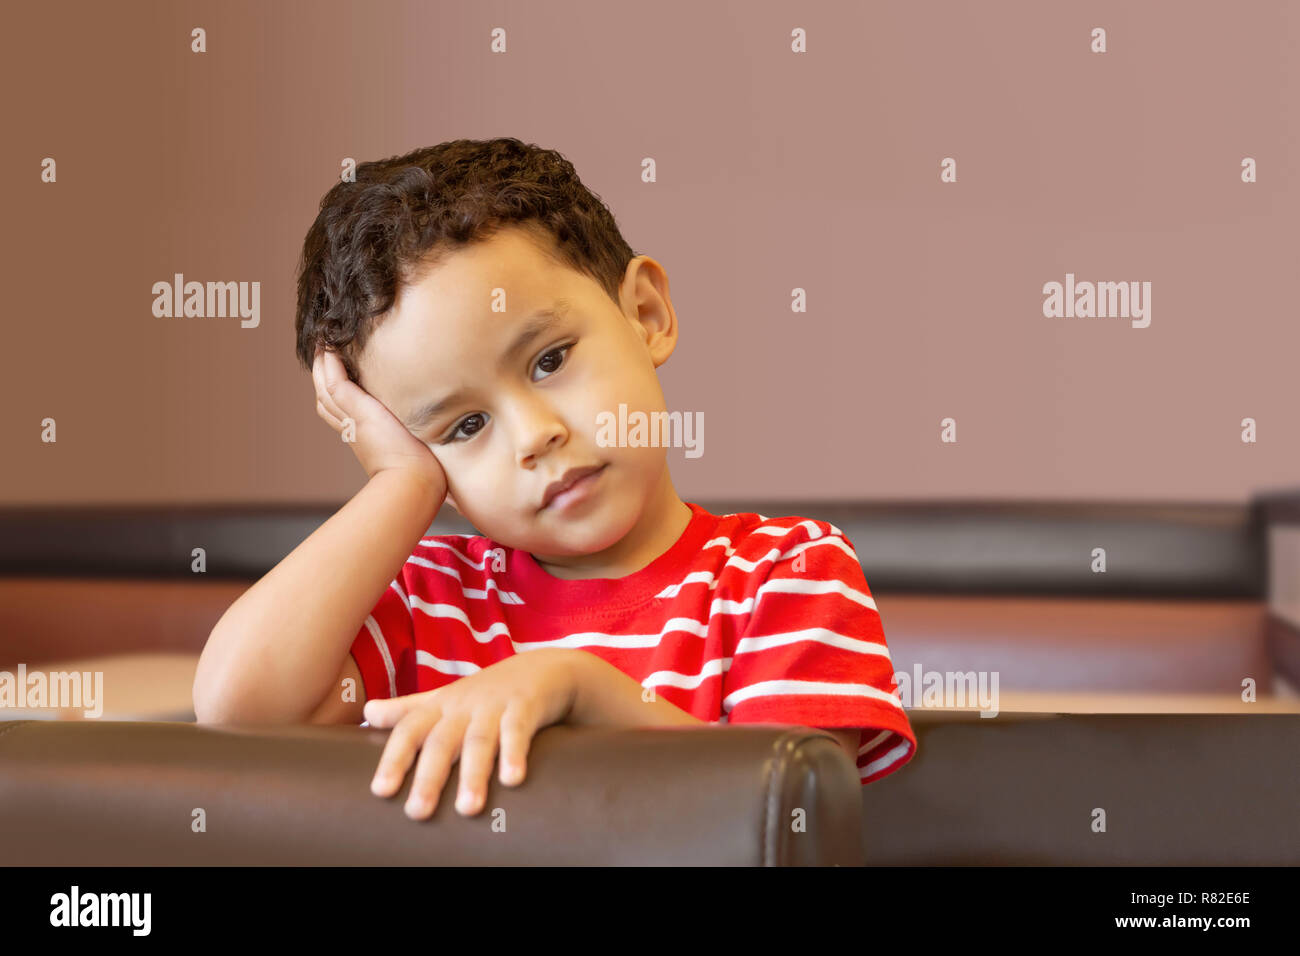 With the elbow on top of the booth, he supports his head with his hand calmly looking. Stock Photo